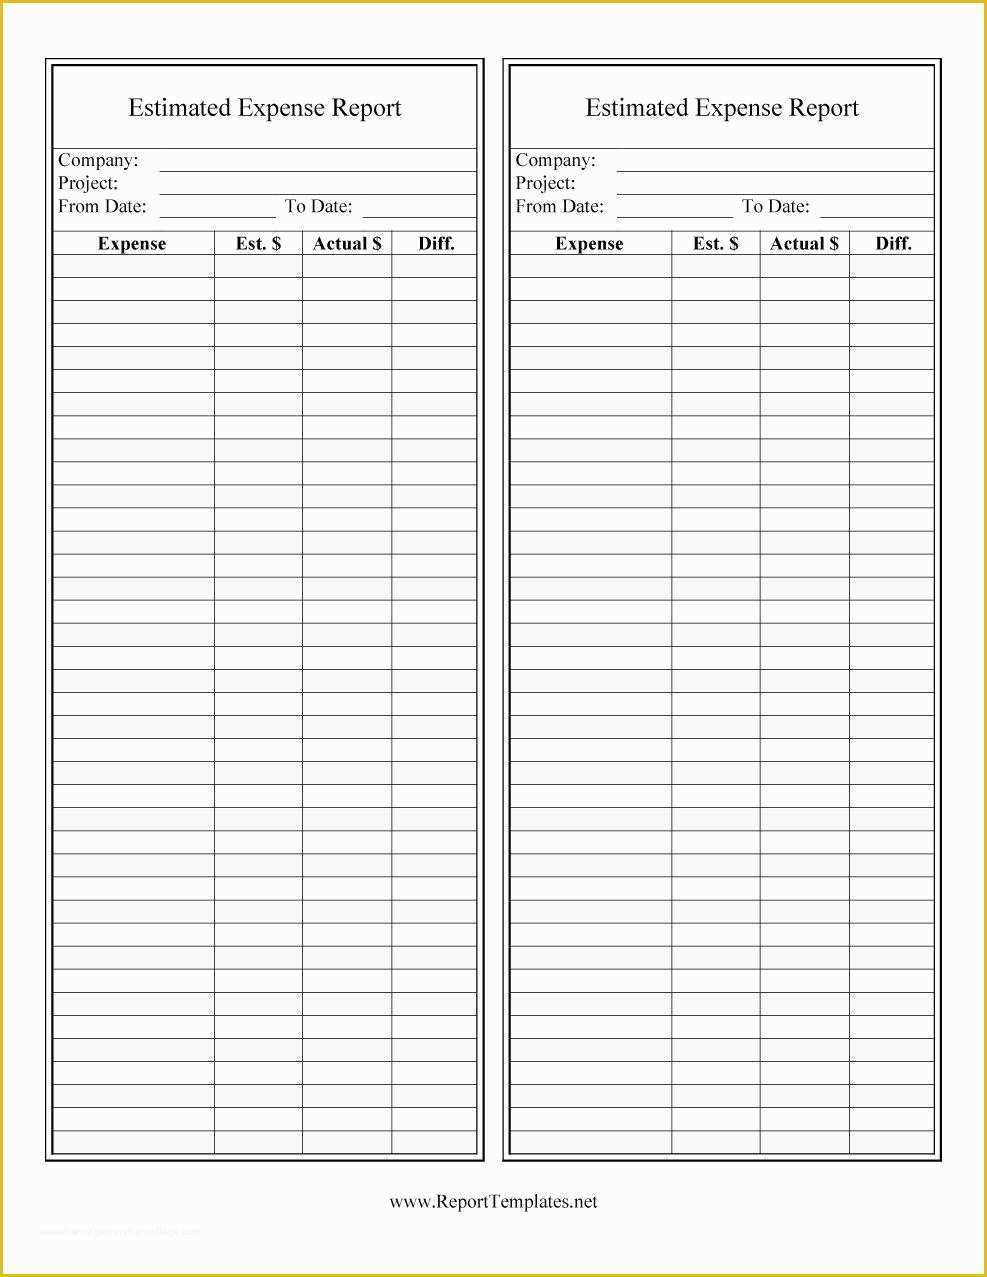 Free Printable Expense Reports Templates Of 40 Expense Report Templates to Help You Save Money